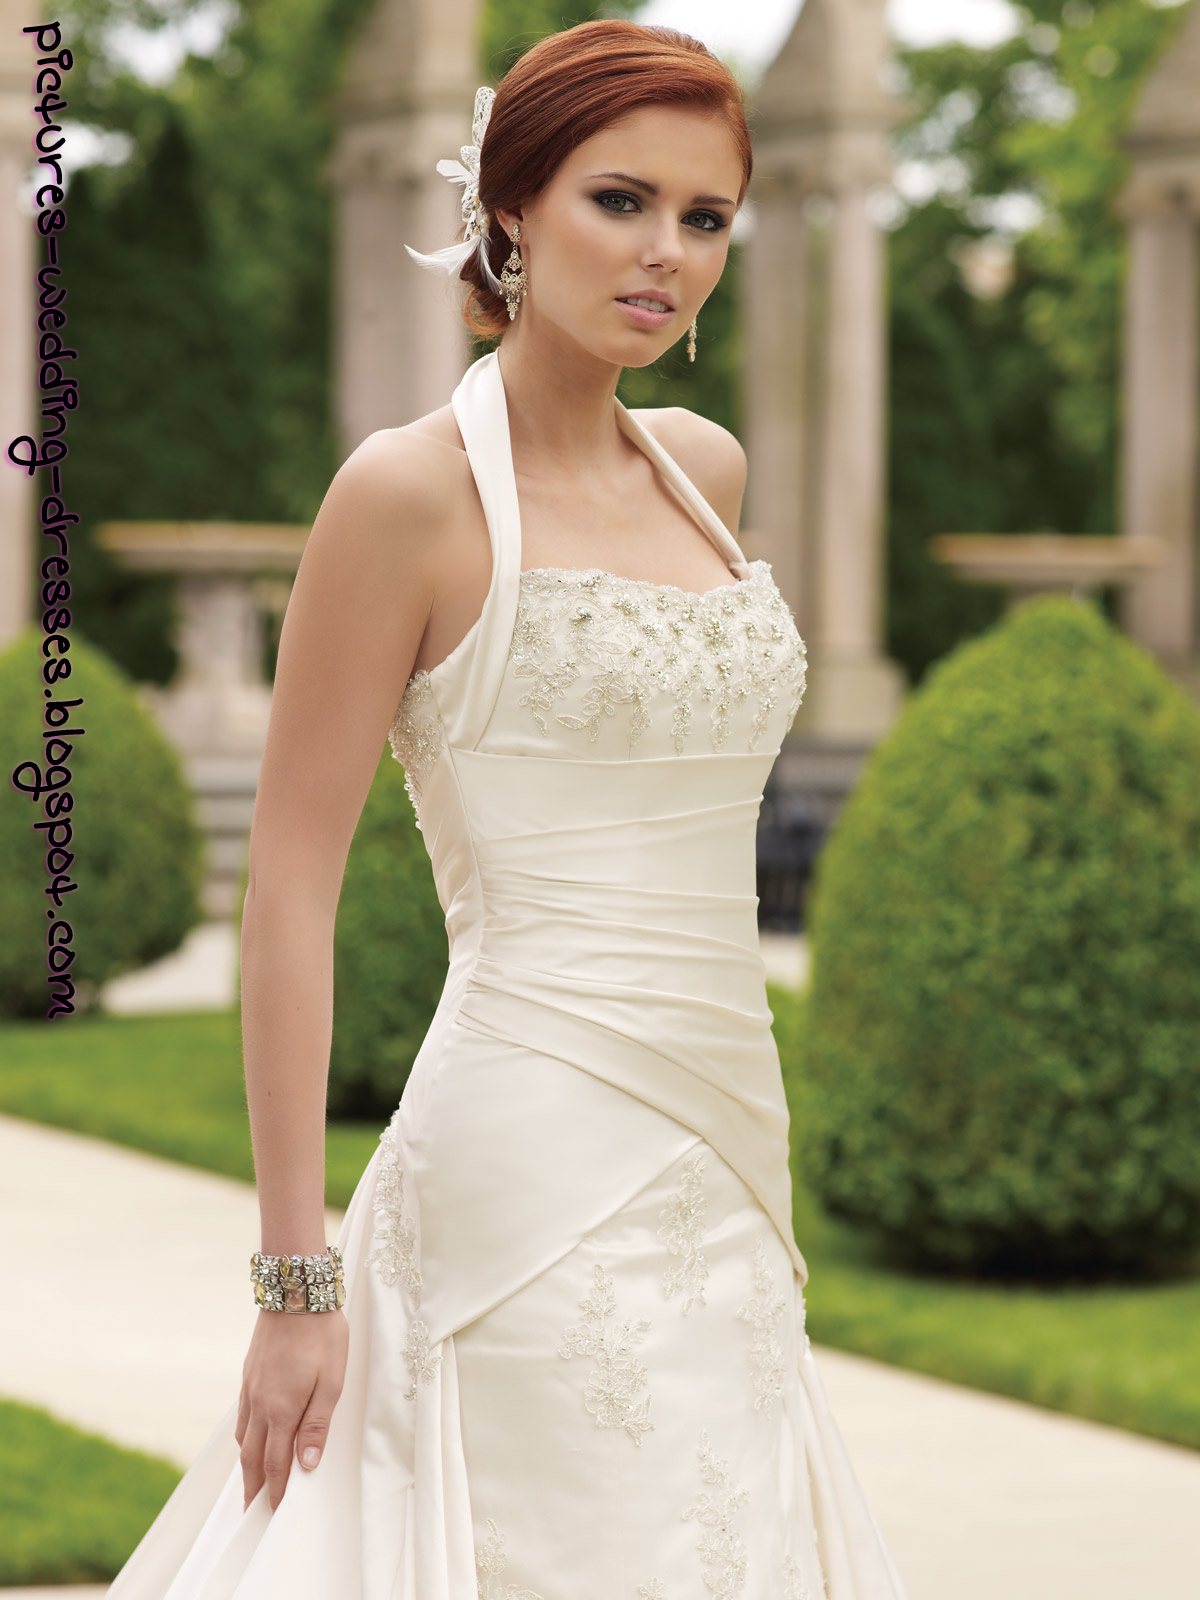 Bridal Gowns 2011the fashions Trends, photos wedding gown brides